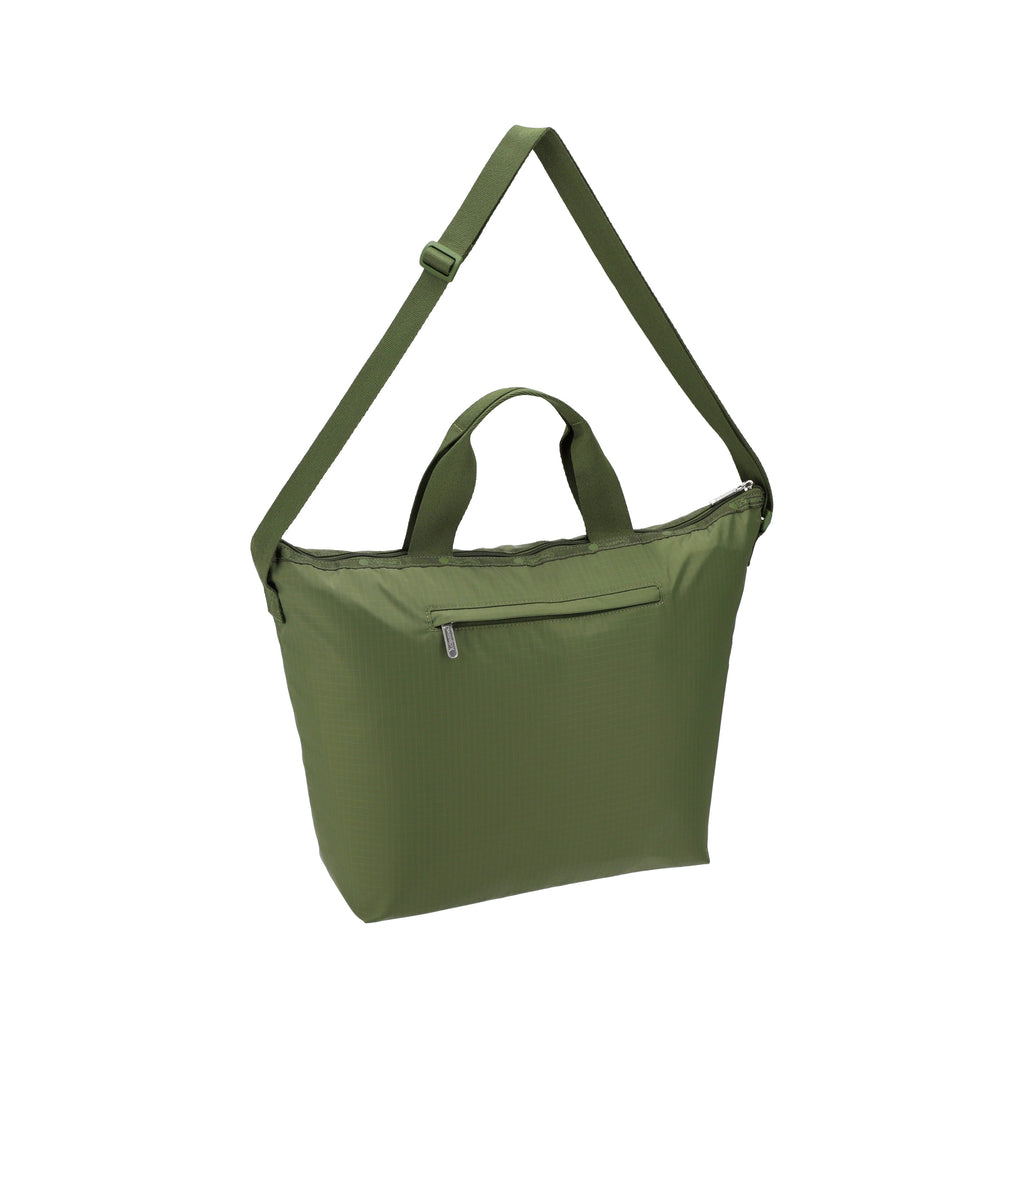 Deluxe Easy Carry Tote - 24737035616304